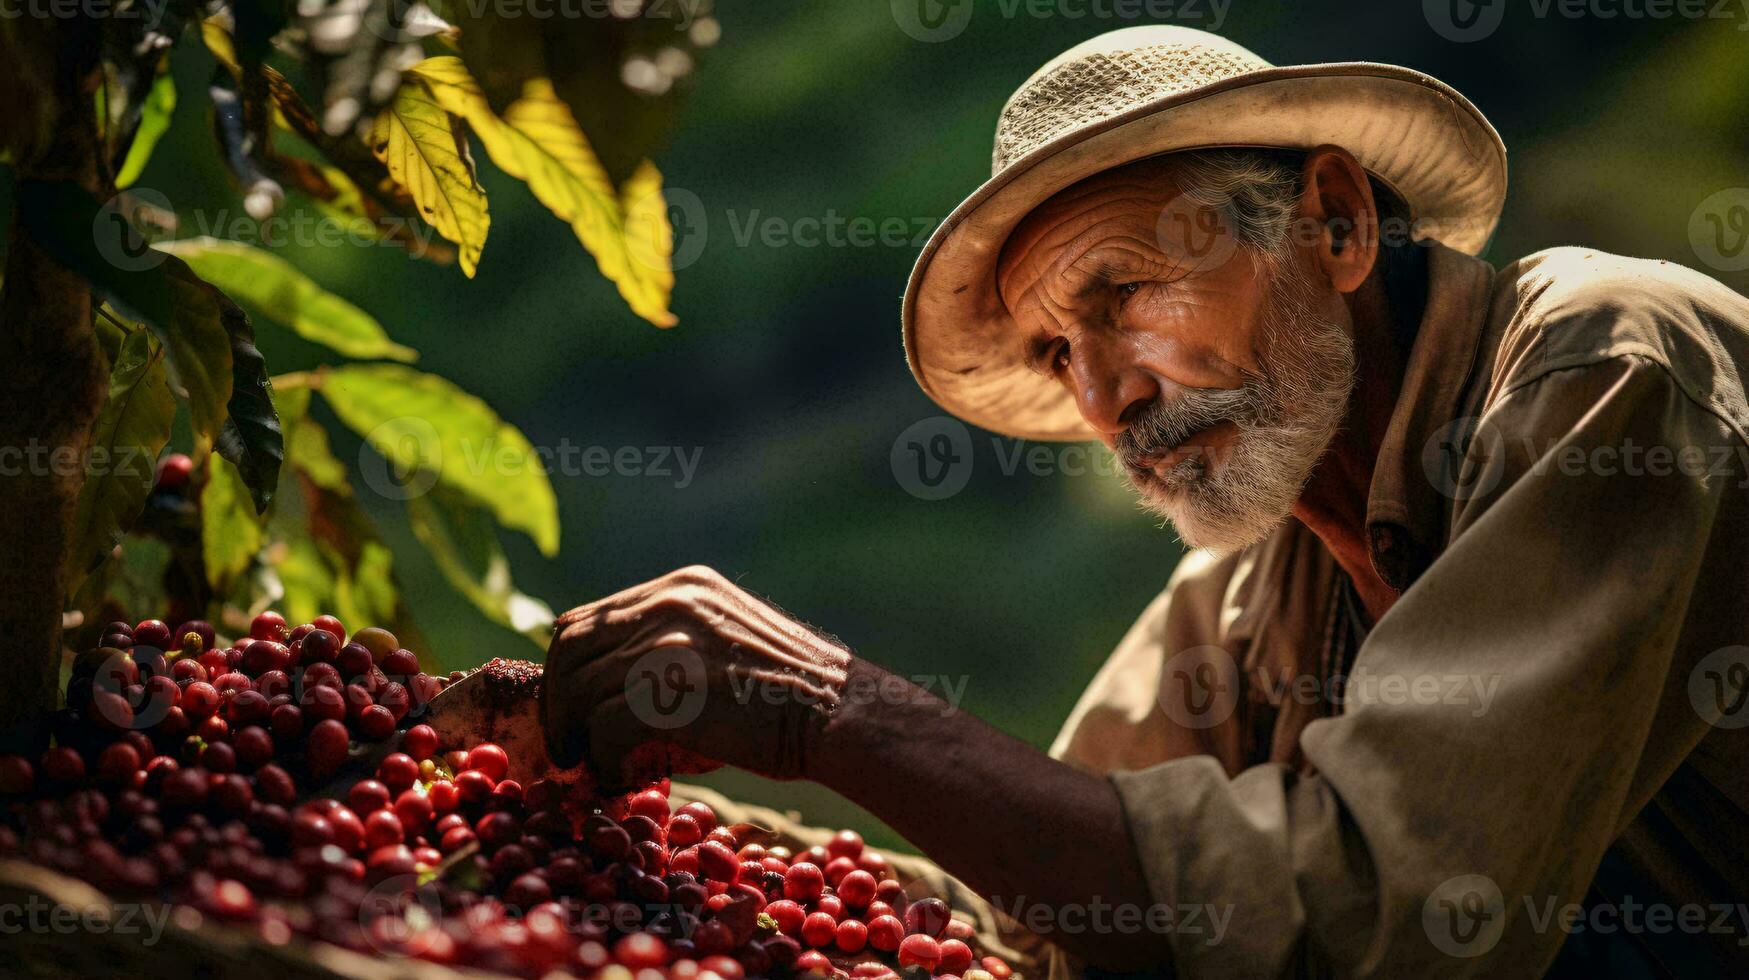 A man in a straw hat picking fresh berries from a bin AI Generated photo